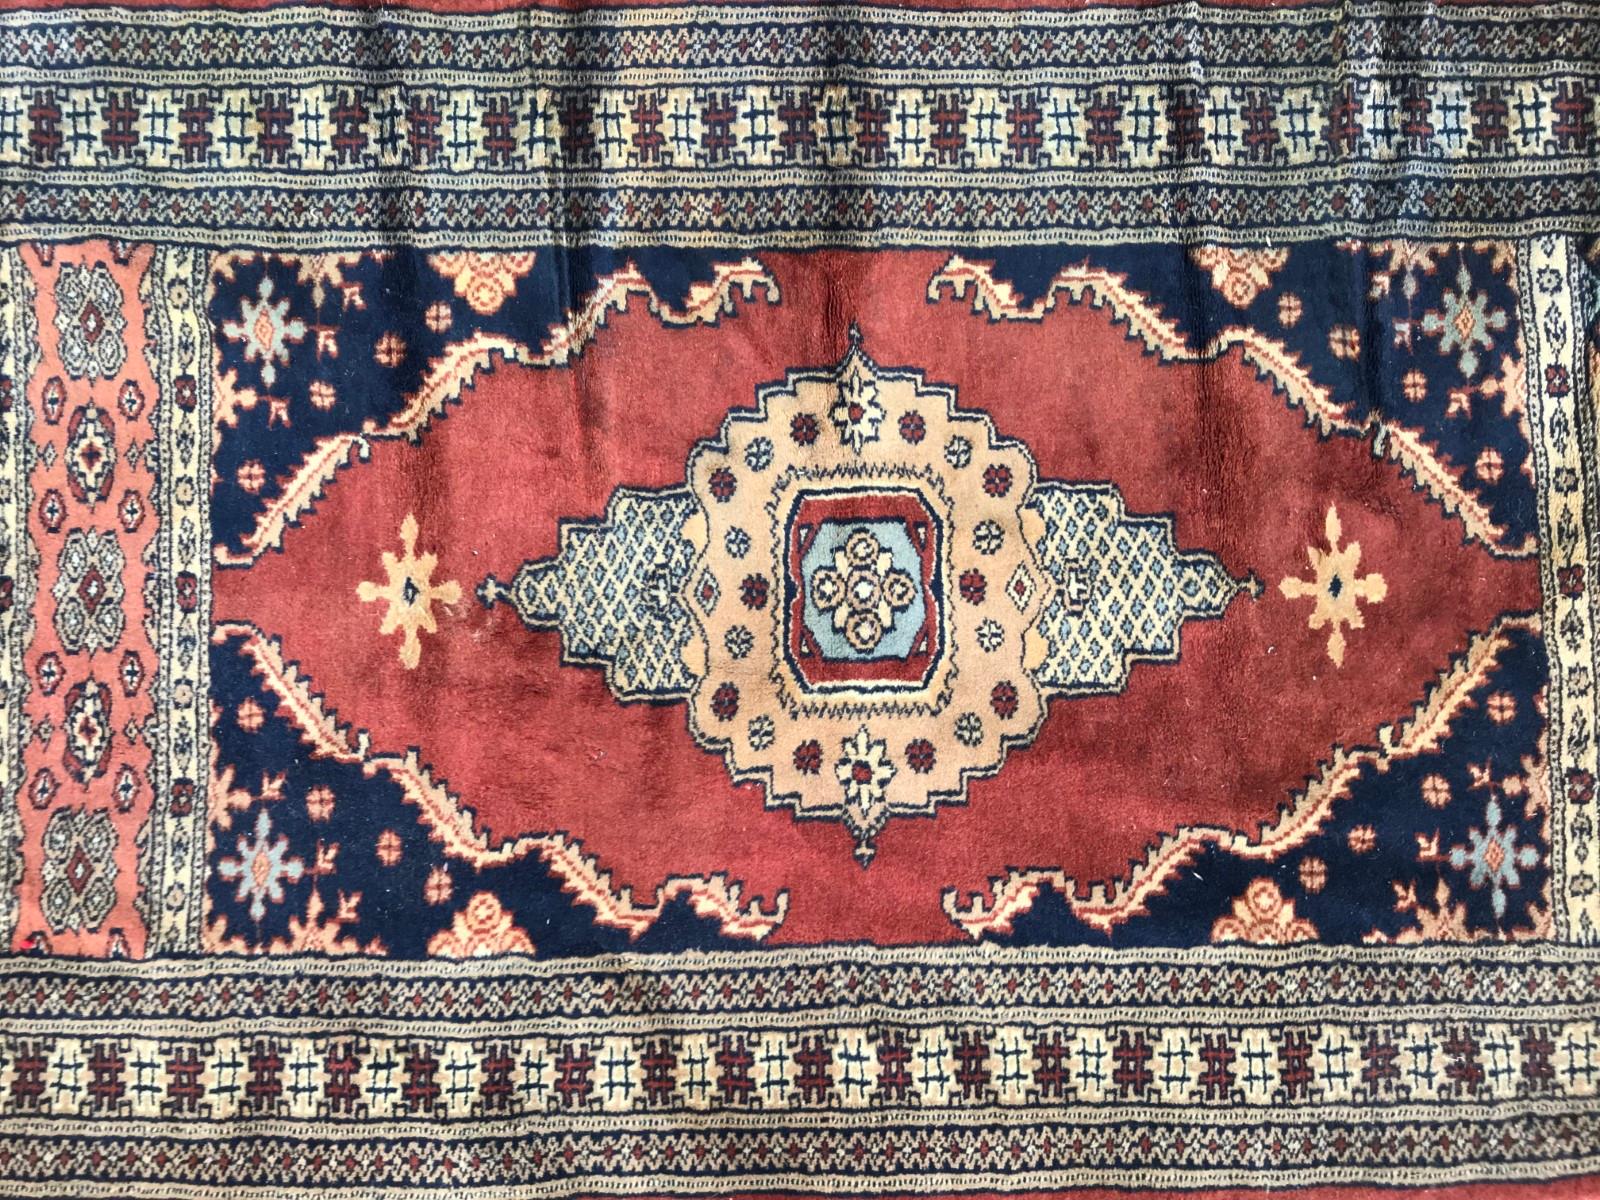 Late 20th century Pakistan corridor rug with a geometrical design and beautiful colors with blue, brown, pink and purple, entirely hand knotted with wool velvet on cotton foundation.

✨✨✨
